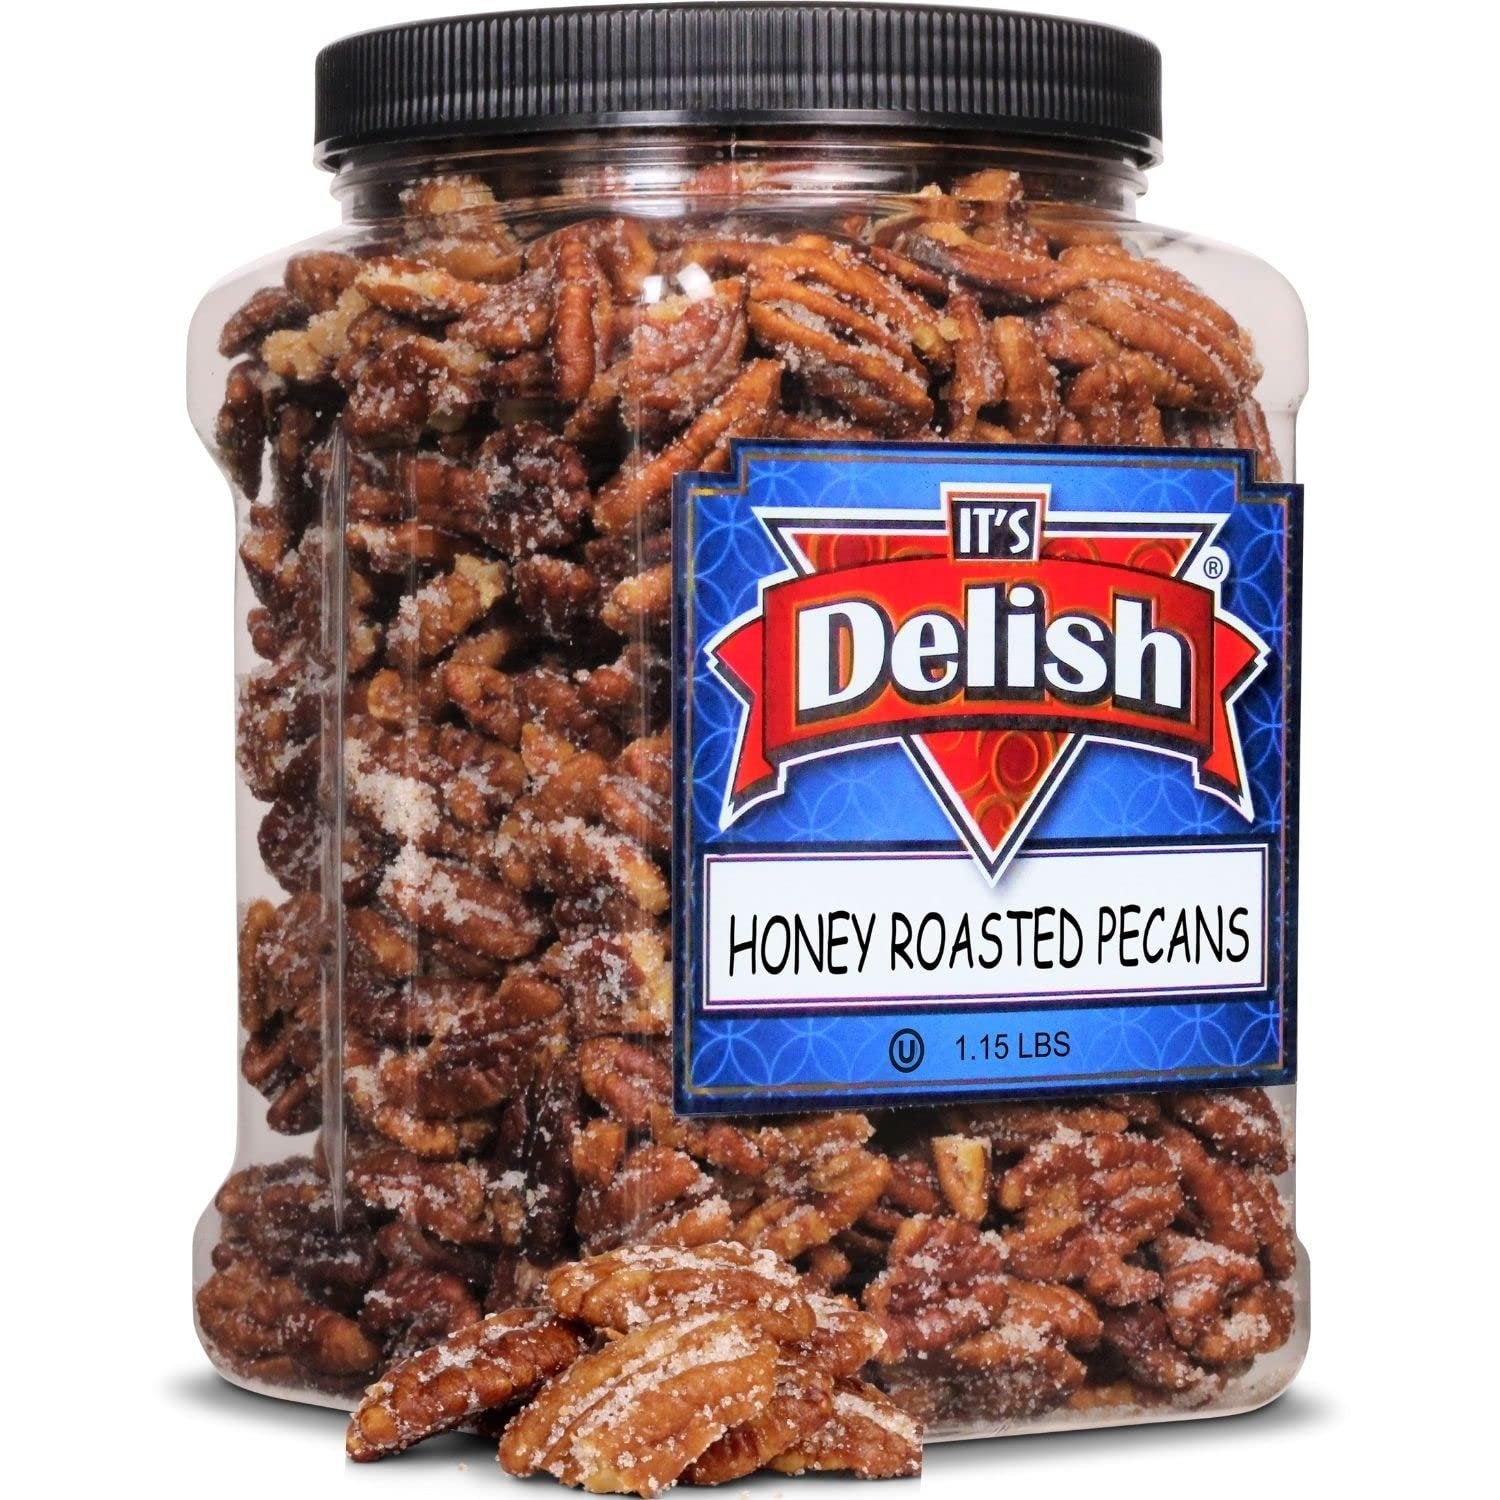 Honey Roasted Pecans, 1.15 LBS Reusable Jumbo Container